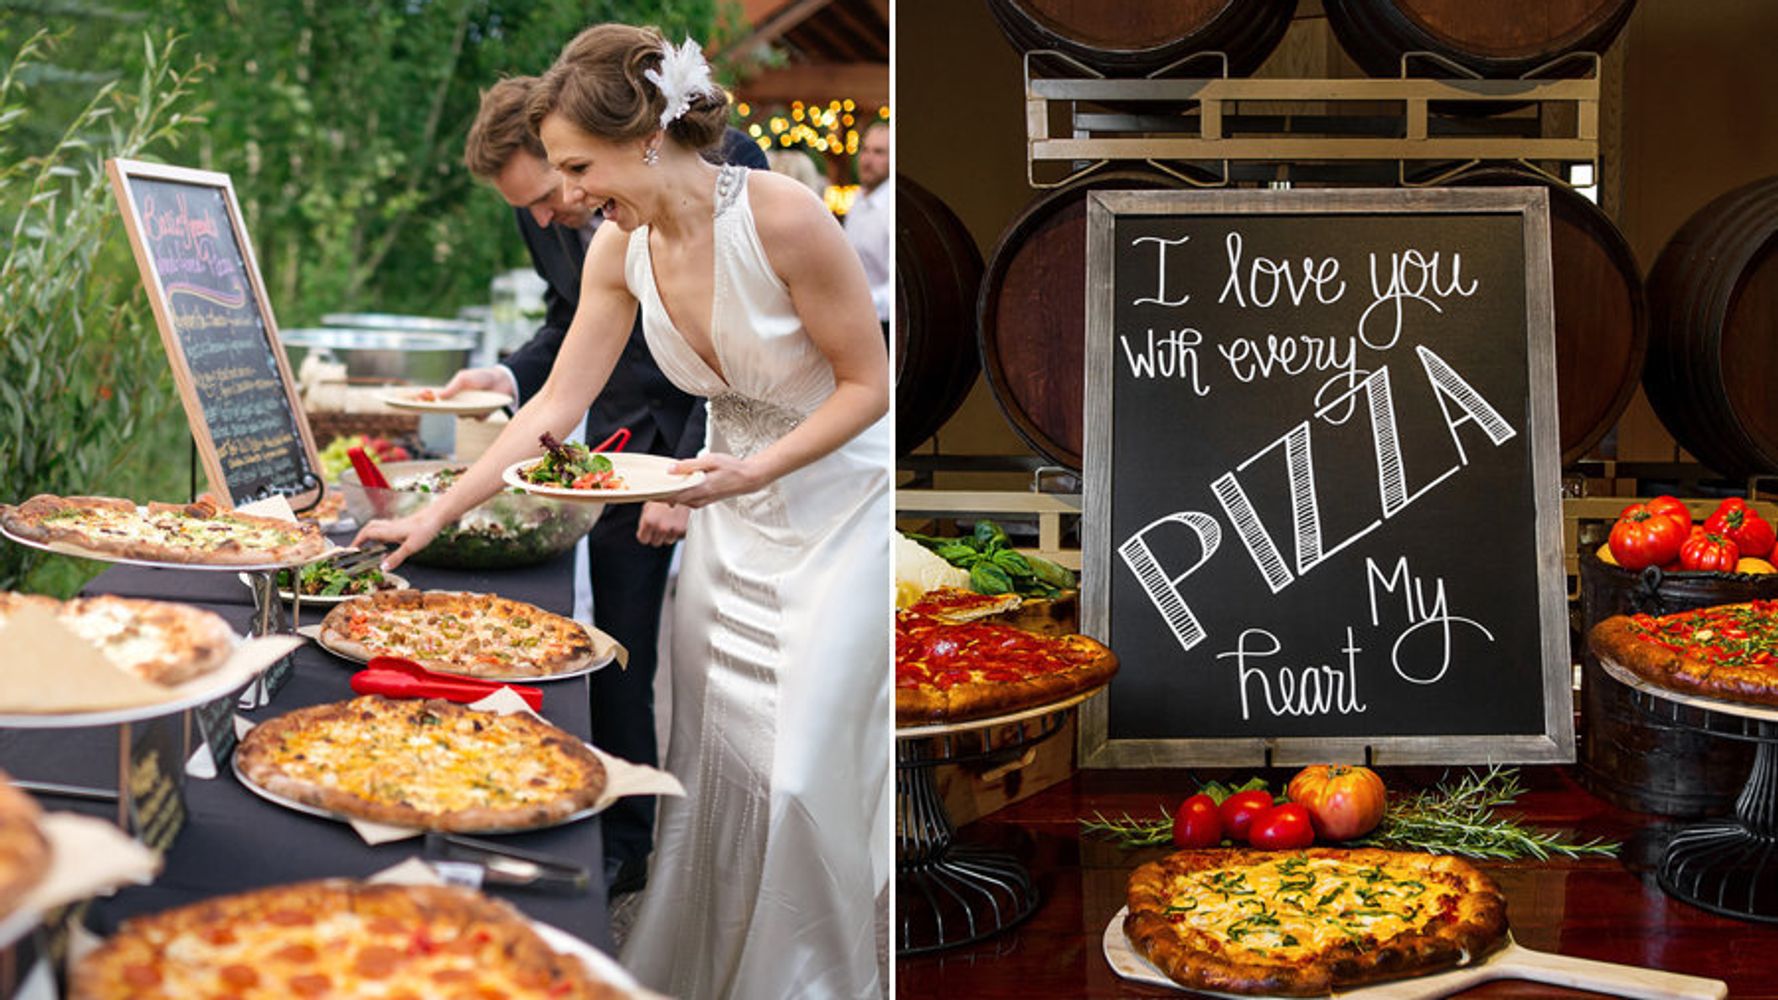 14 Perfectly Cheesy Wedding Ideas For Couples Obsessed With Pizza |  HuffPost Life